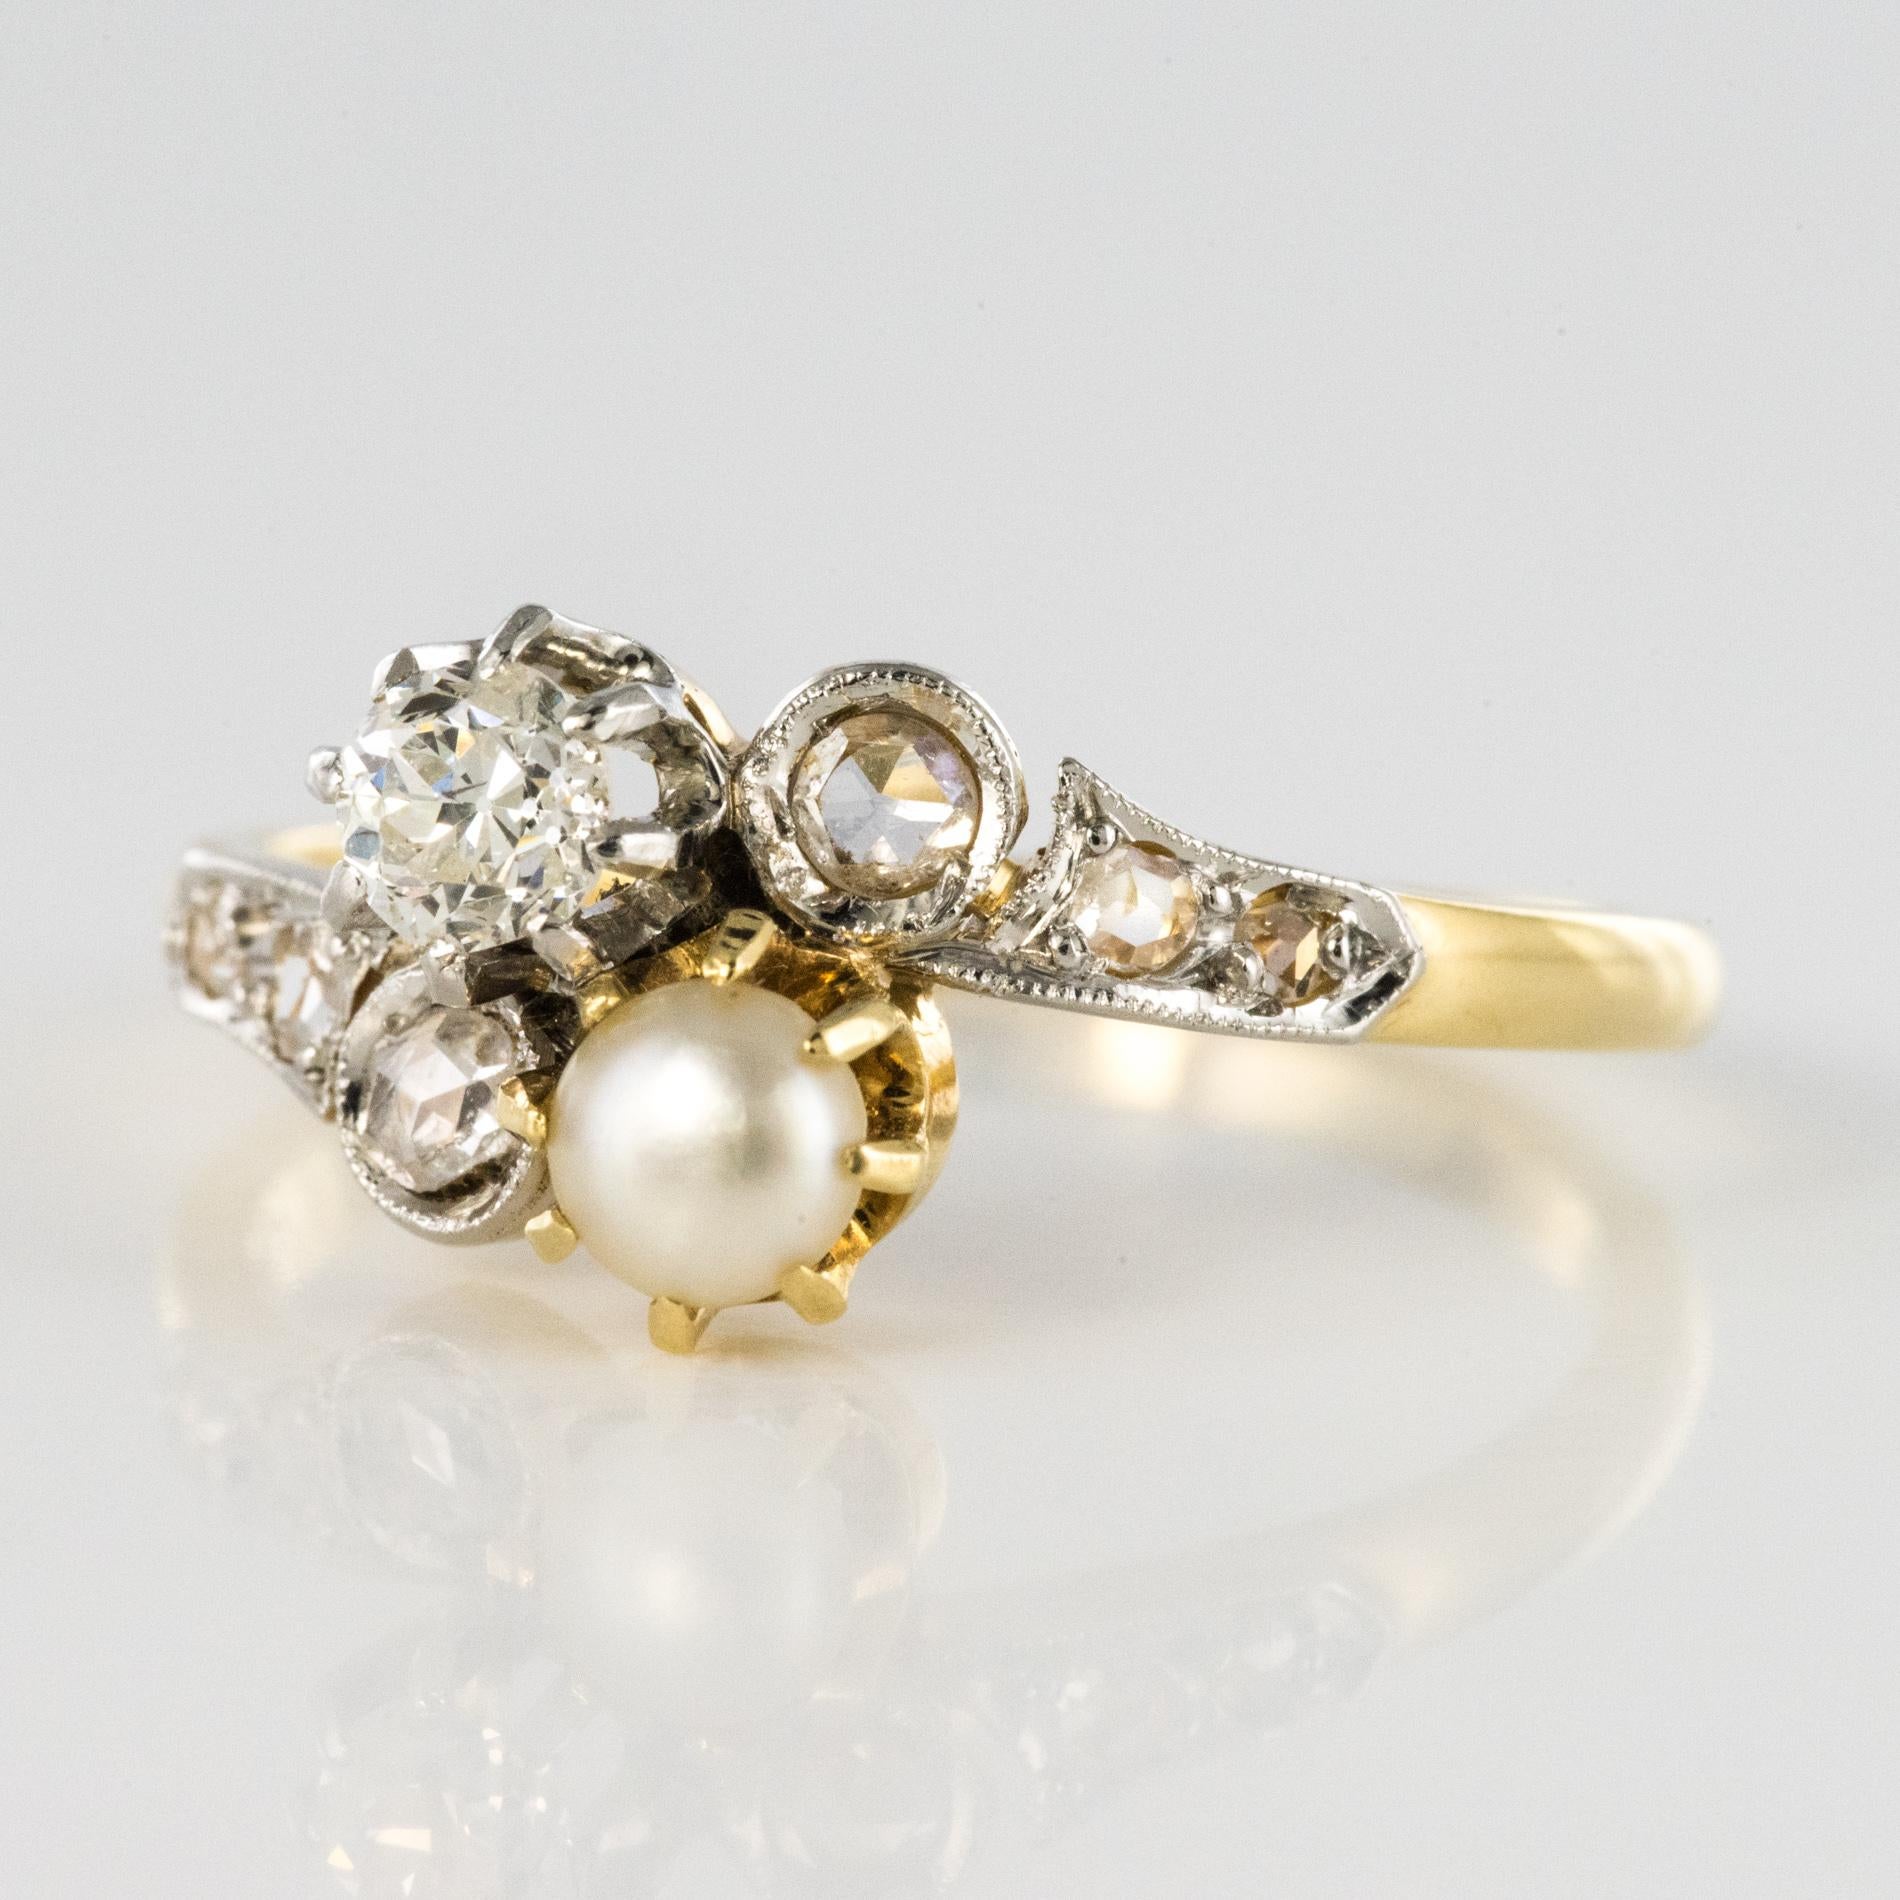 Napoleon III 19th Century French Diamond Natural Pearl You and Me Engagement Ring